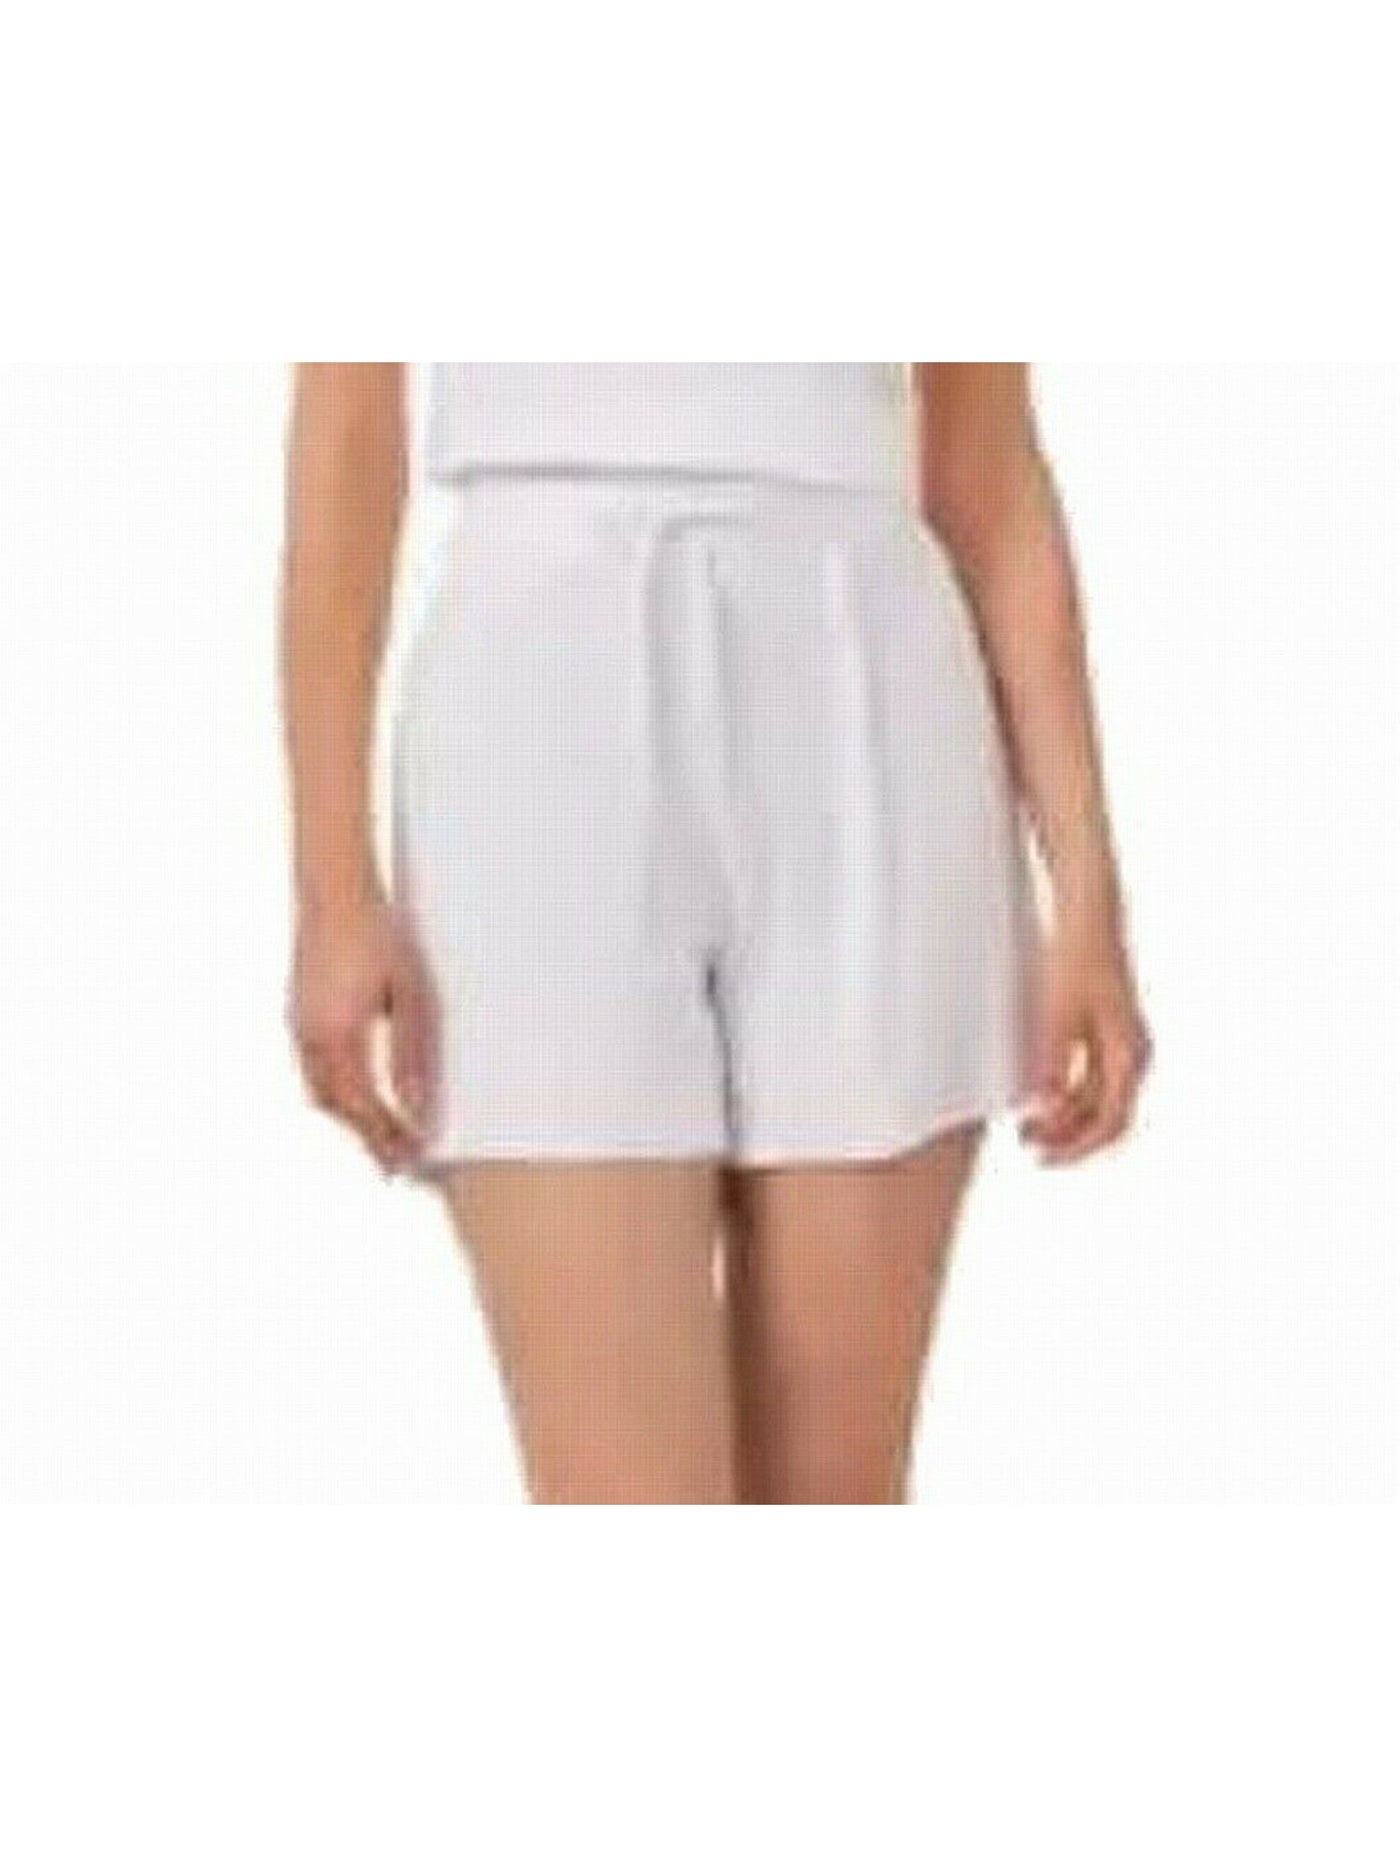 RILEY&RAE Womens White Pocketed Tie Two Front Pockets,  Relaxed Fit. Shorts M